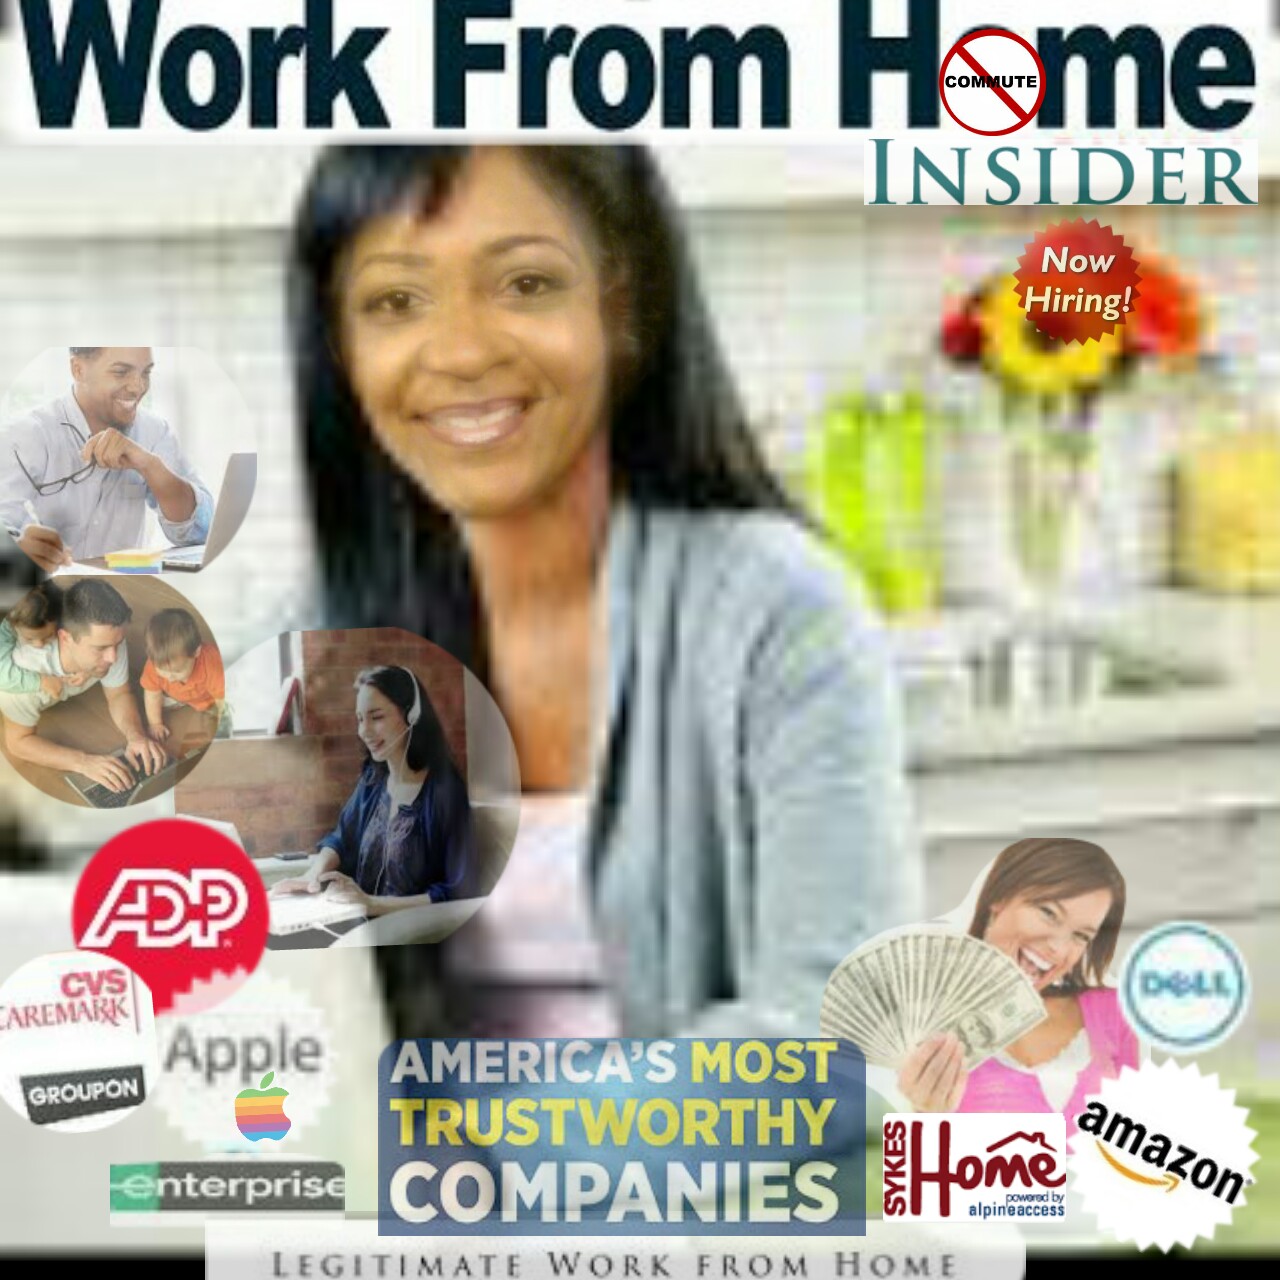 WORK FROM HOME DIRECTORY